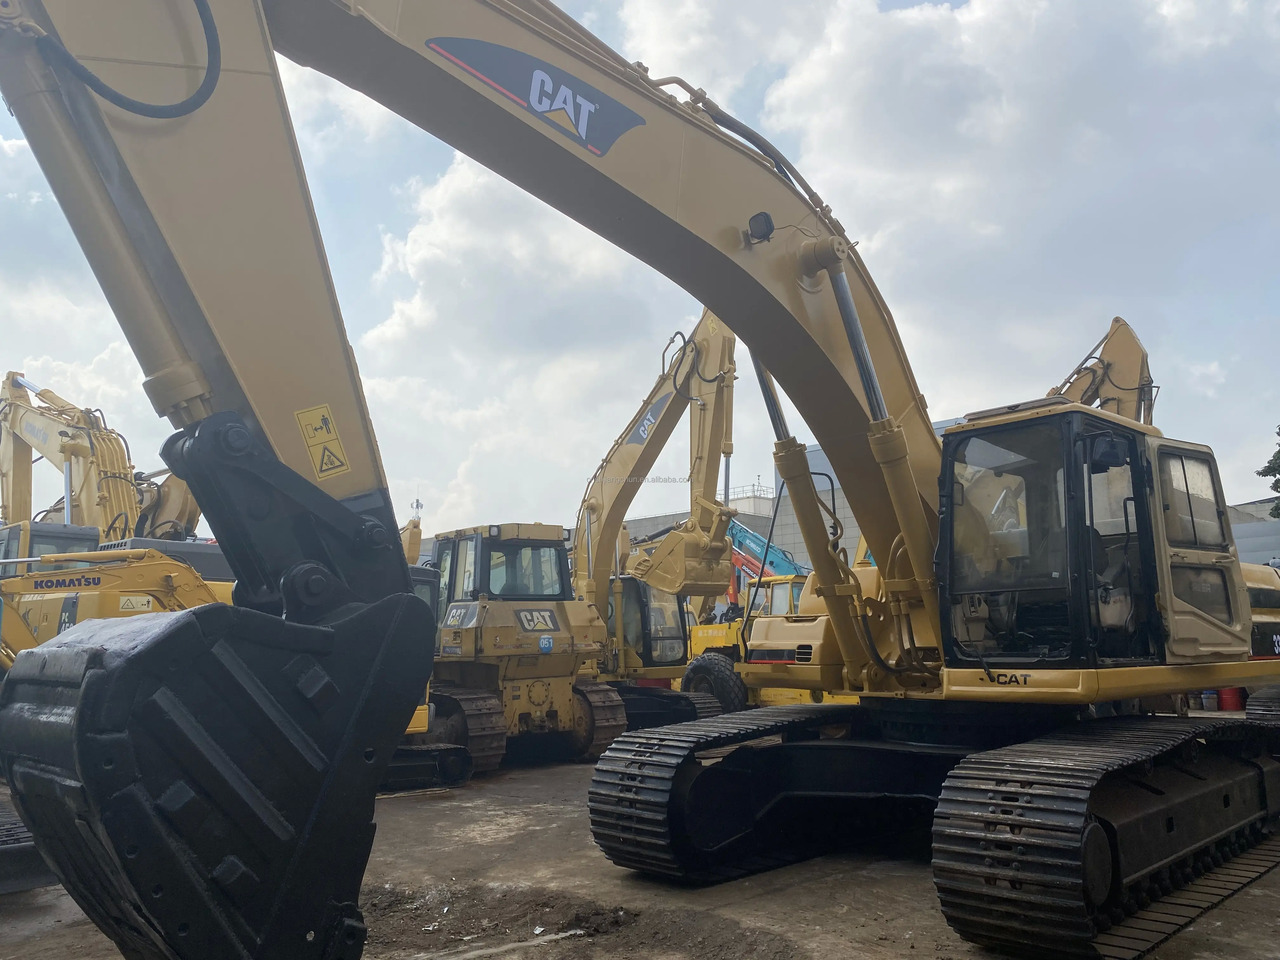 Crawler excavator new arrival Used Caterpillar crawler excavator CAT 330BL in good condition for sale with low price: picture 3